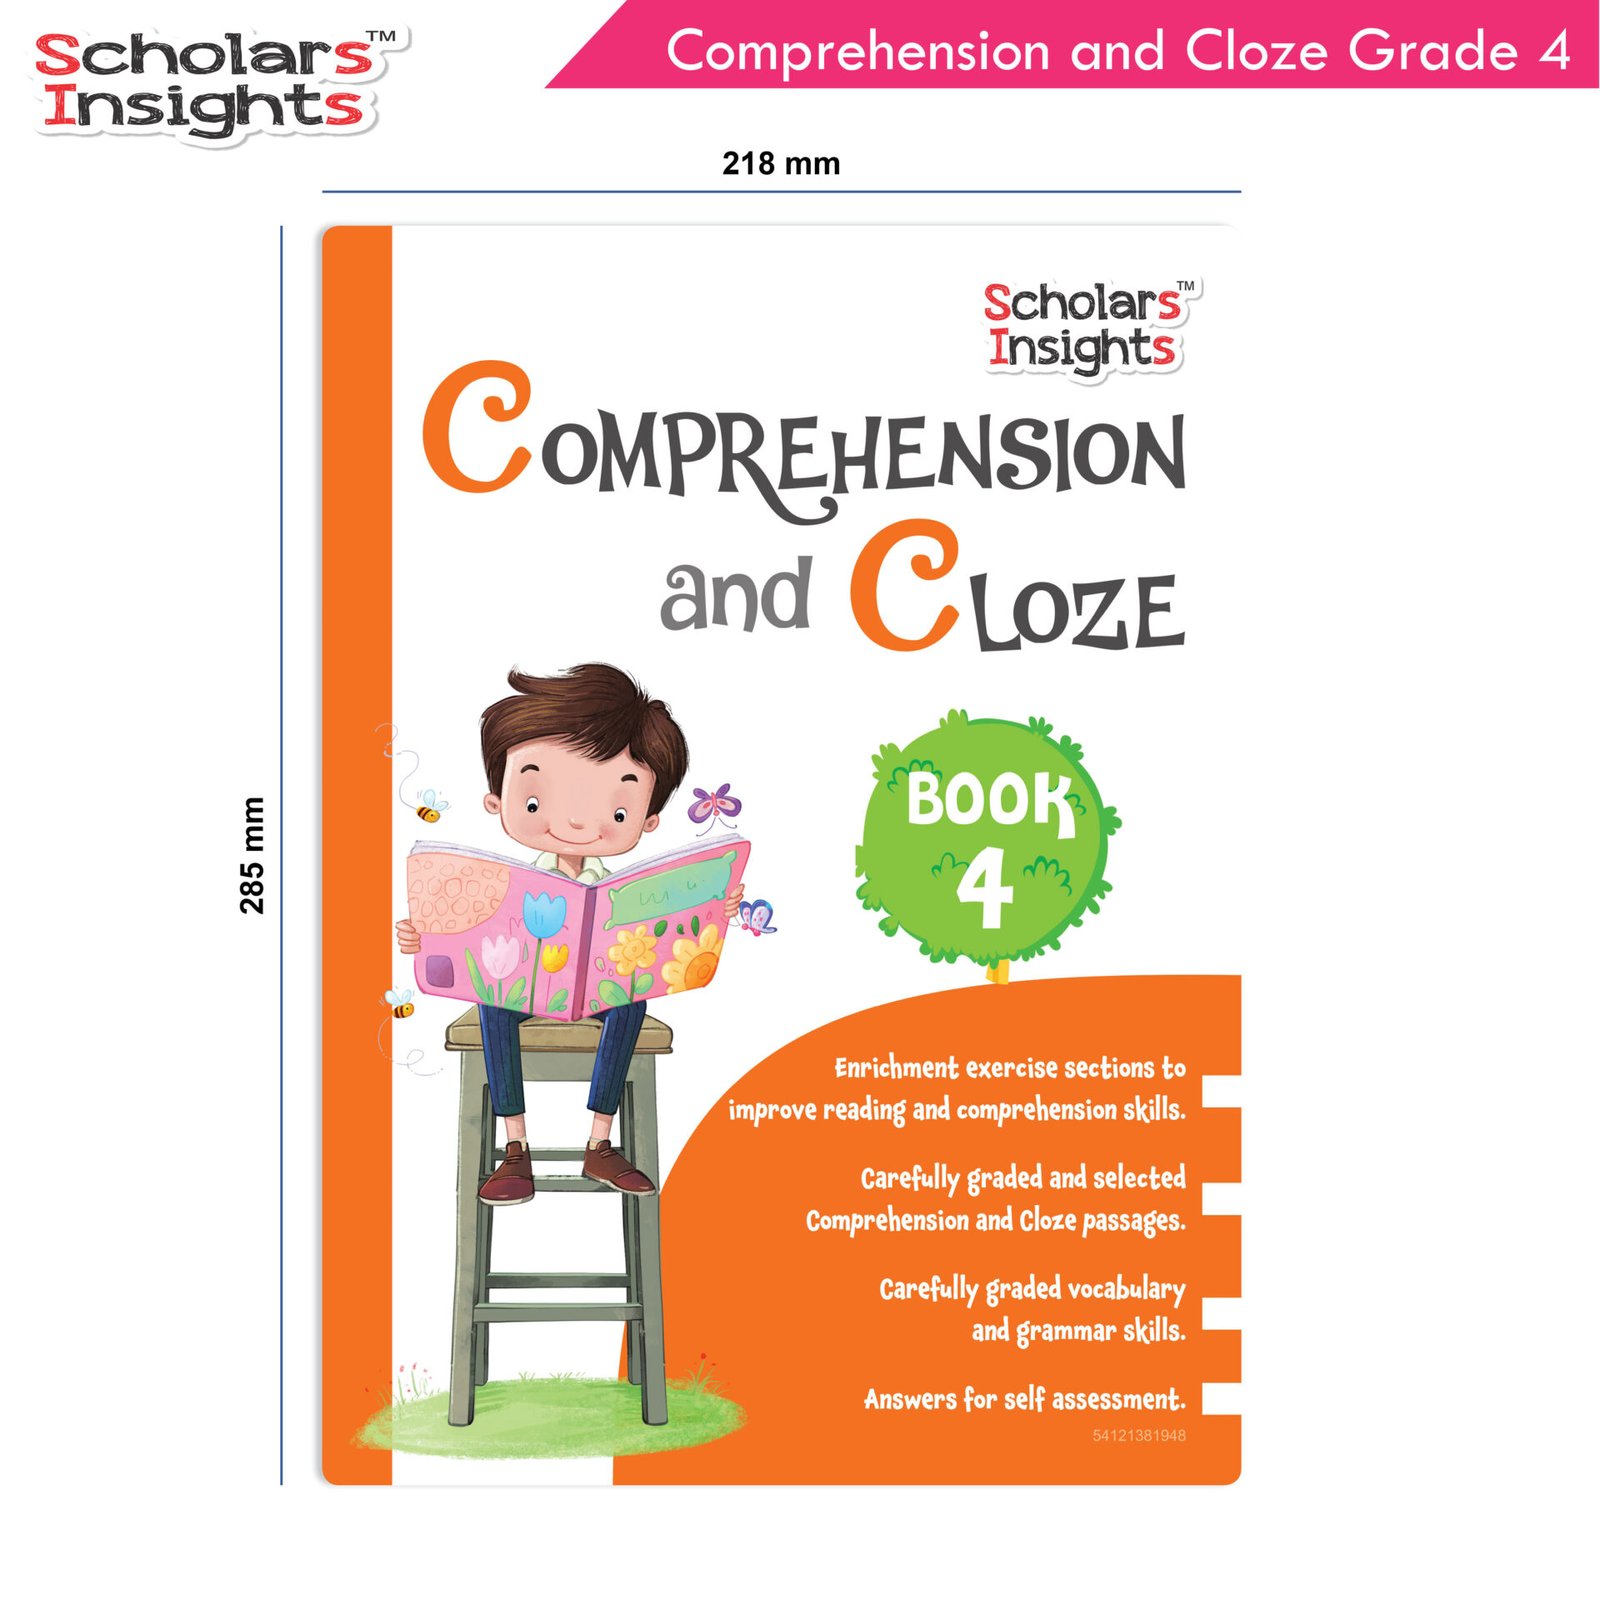 Scholars Insights Comprehension and Cloze Grade 4 2 1